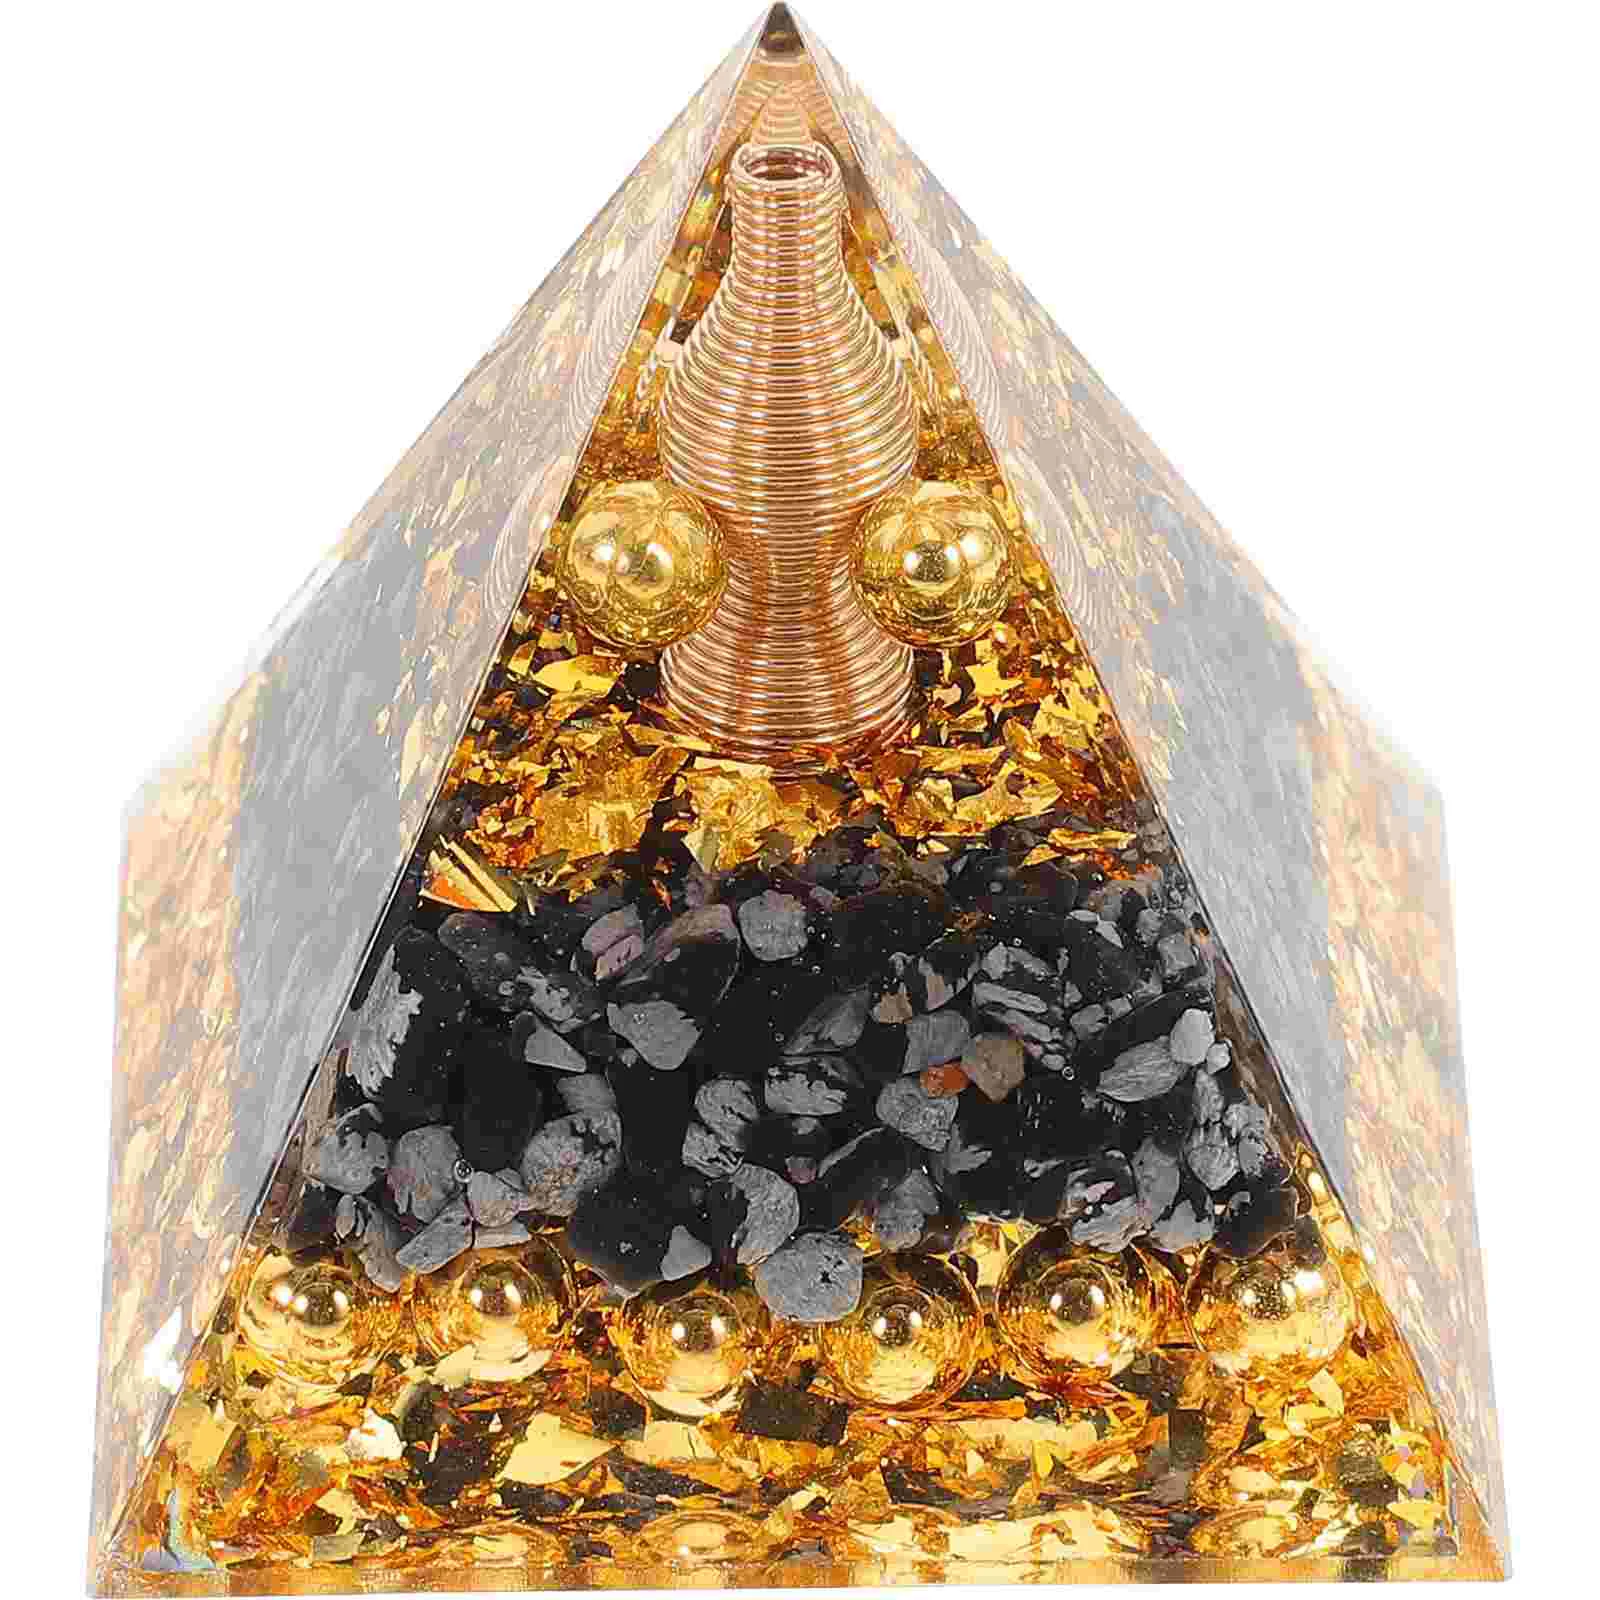 

Small Resin Pyramid Model Desktop Pyramid Ornament Exquisite Pyramid Statue for Home Office